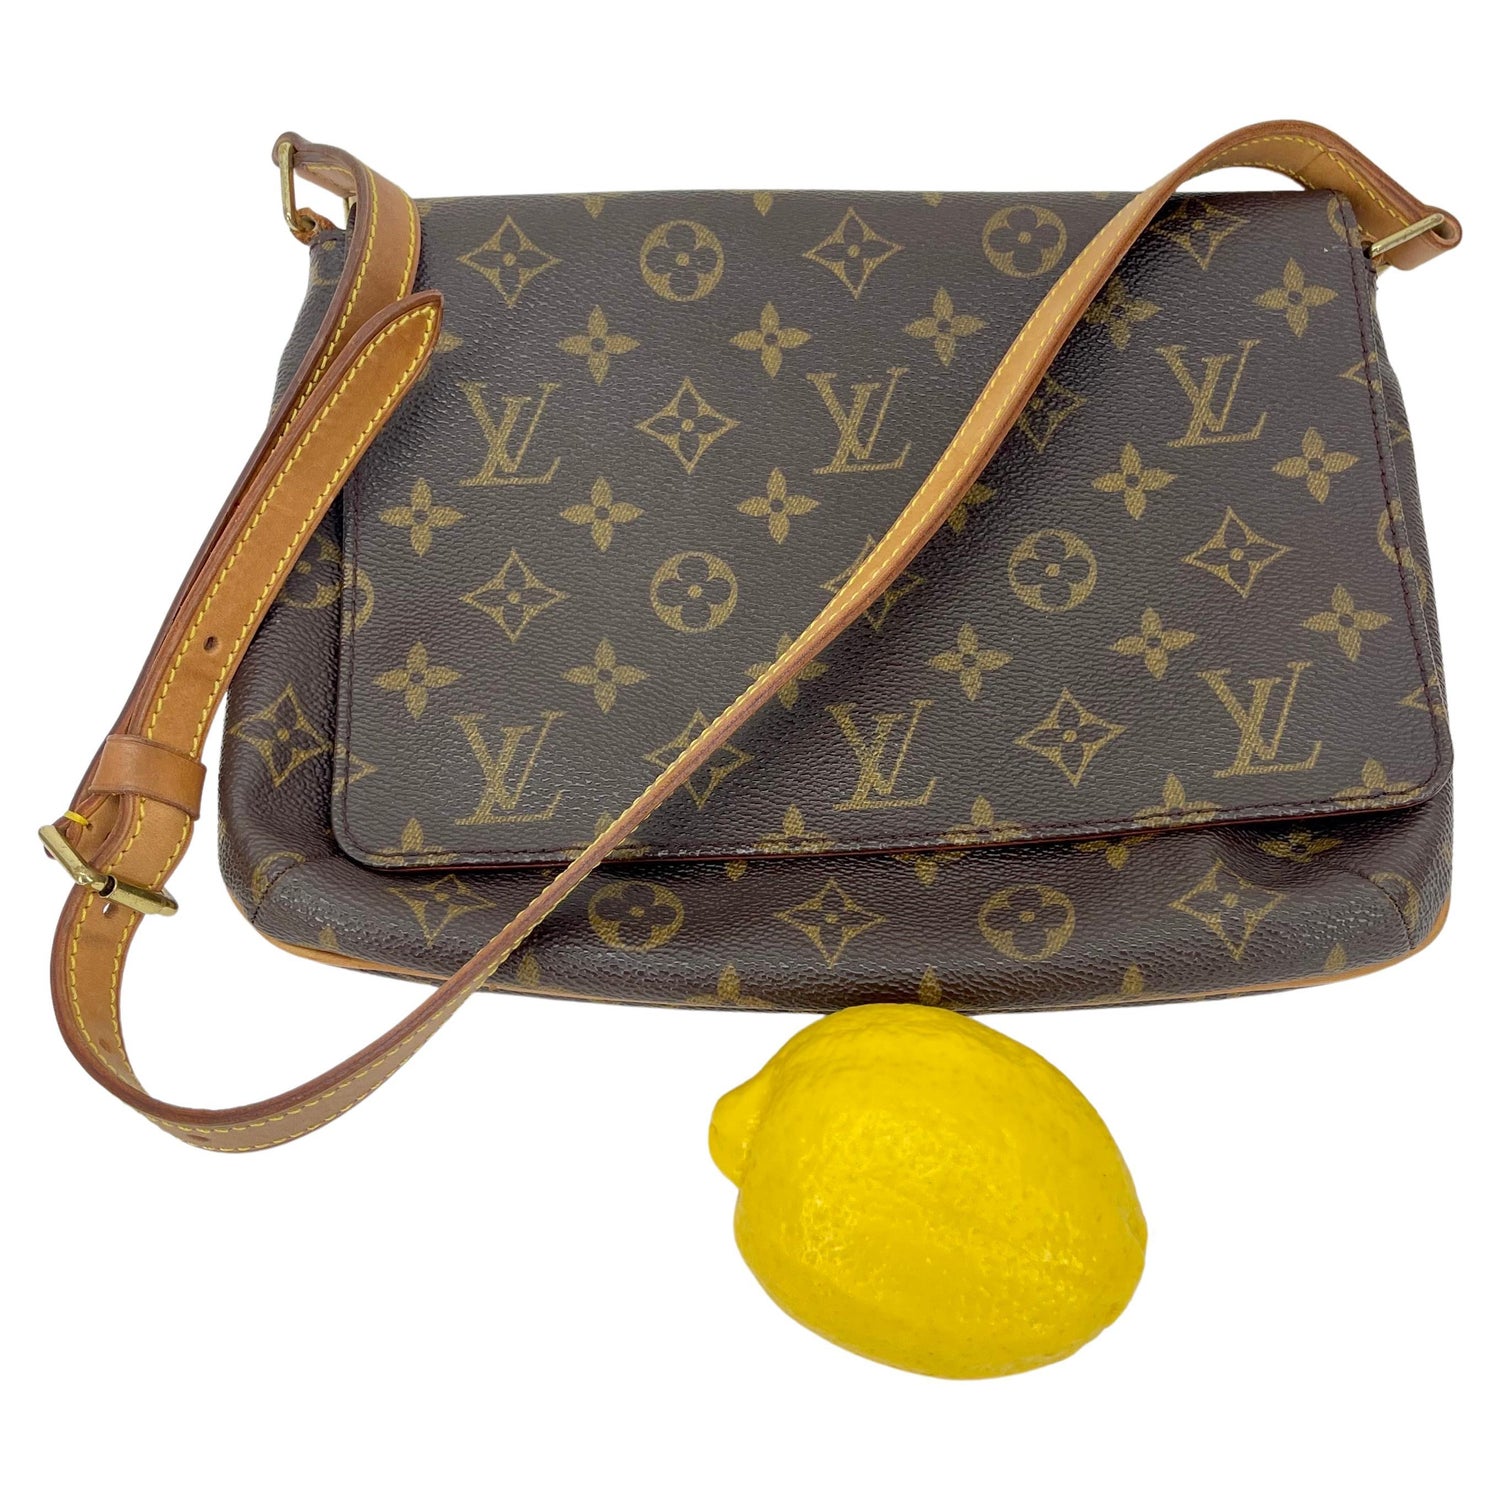 How to spot a FAKE and AUTHENTIC LOUIS VUITTON bag? - Love Cynthia